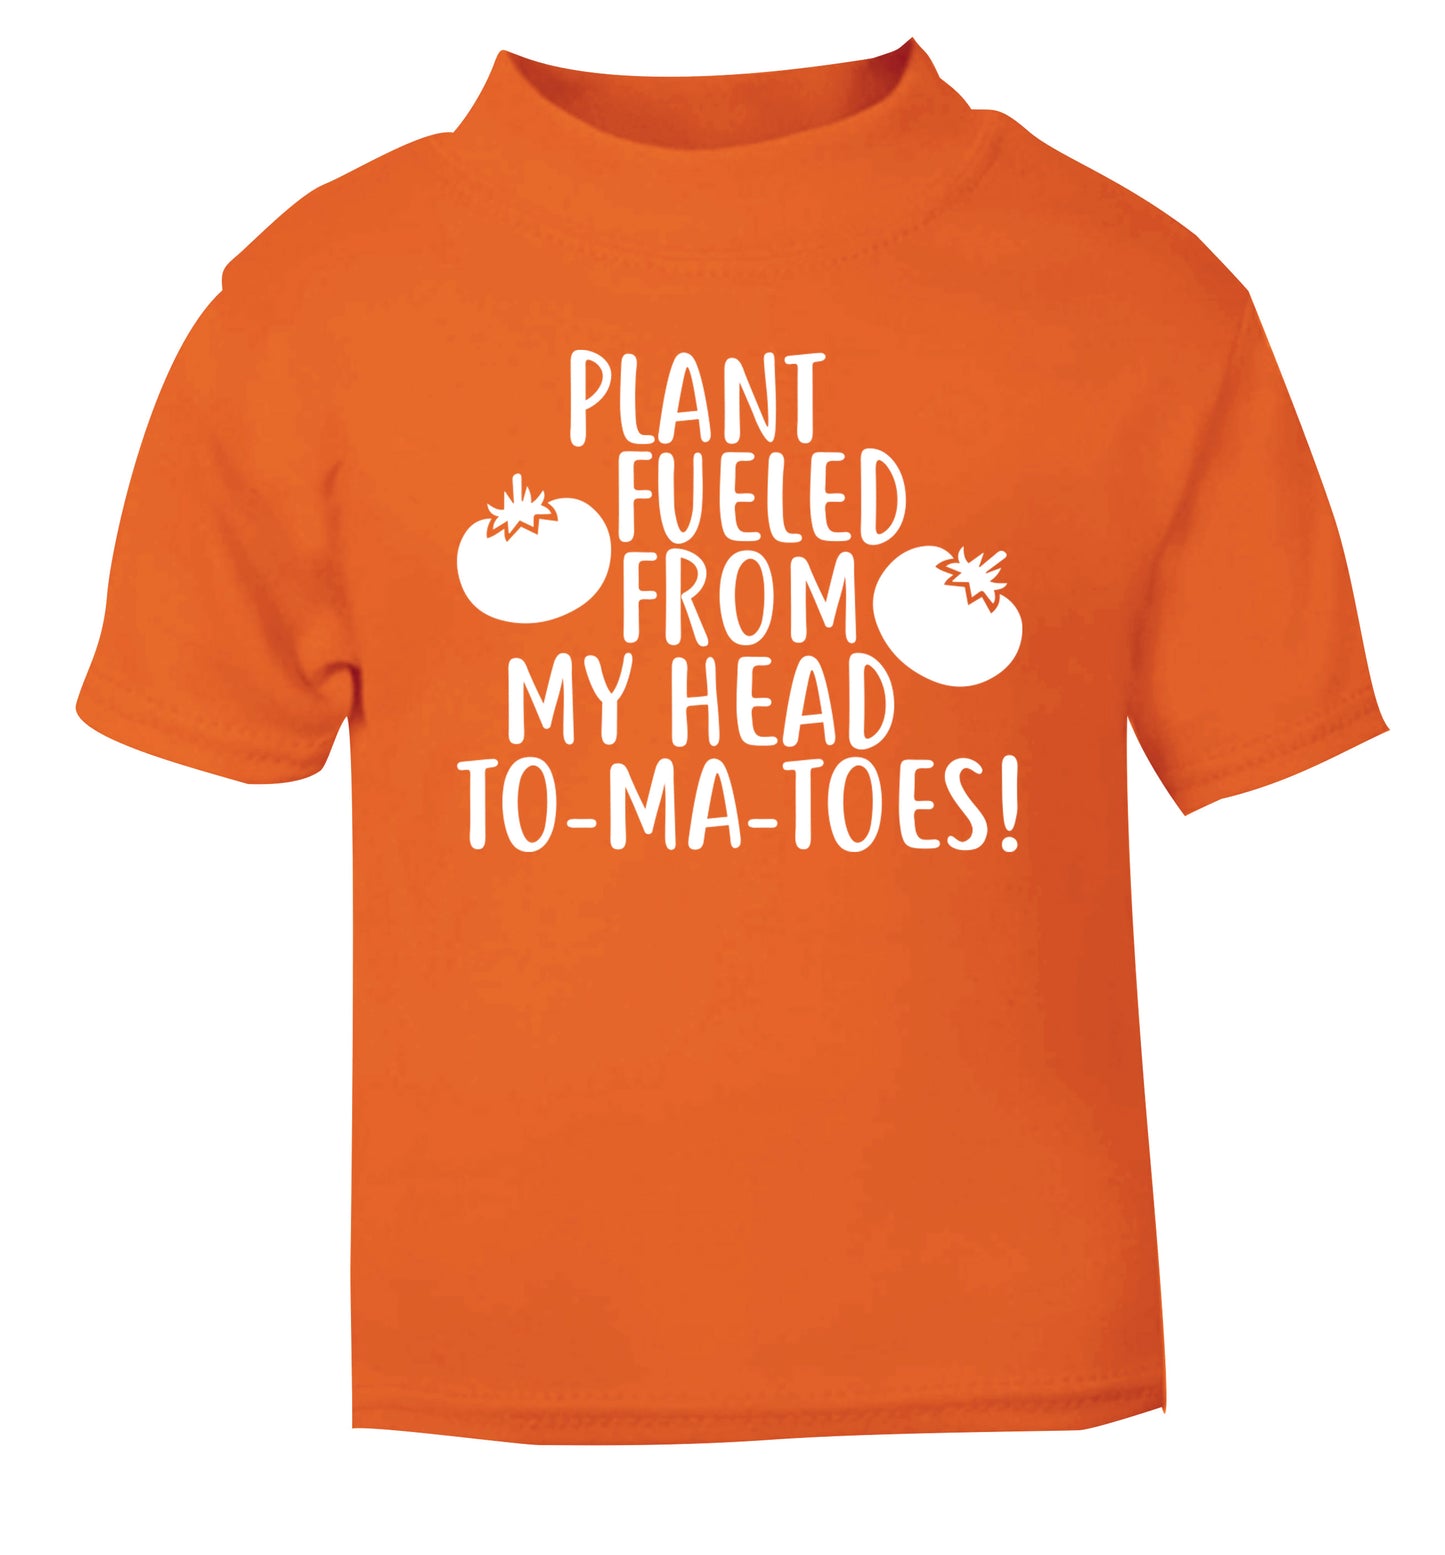 Plant fueled from my head to-ma-toes orange Baby Toddler Tshirt 2 Years